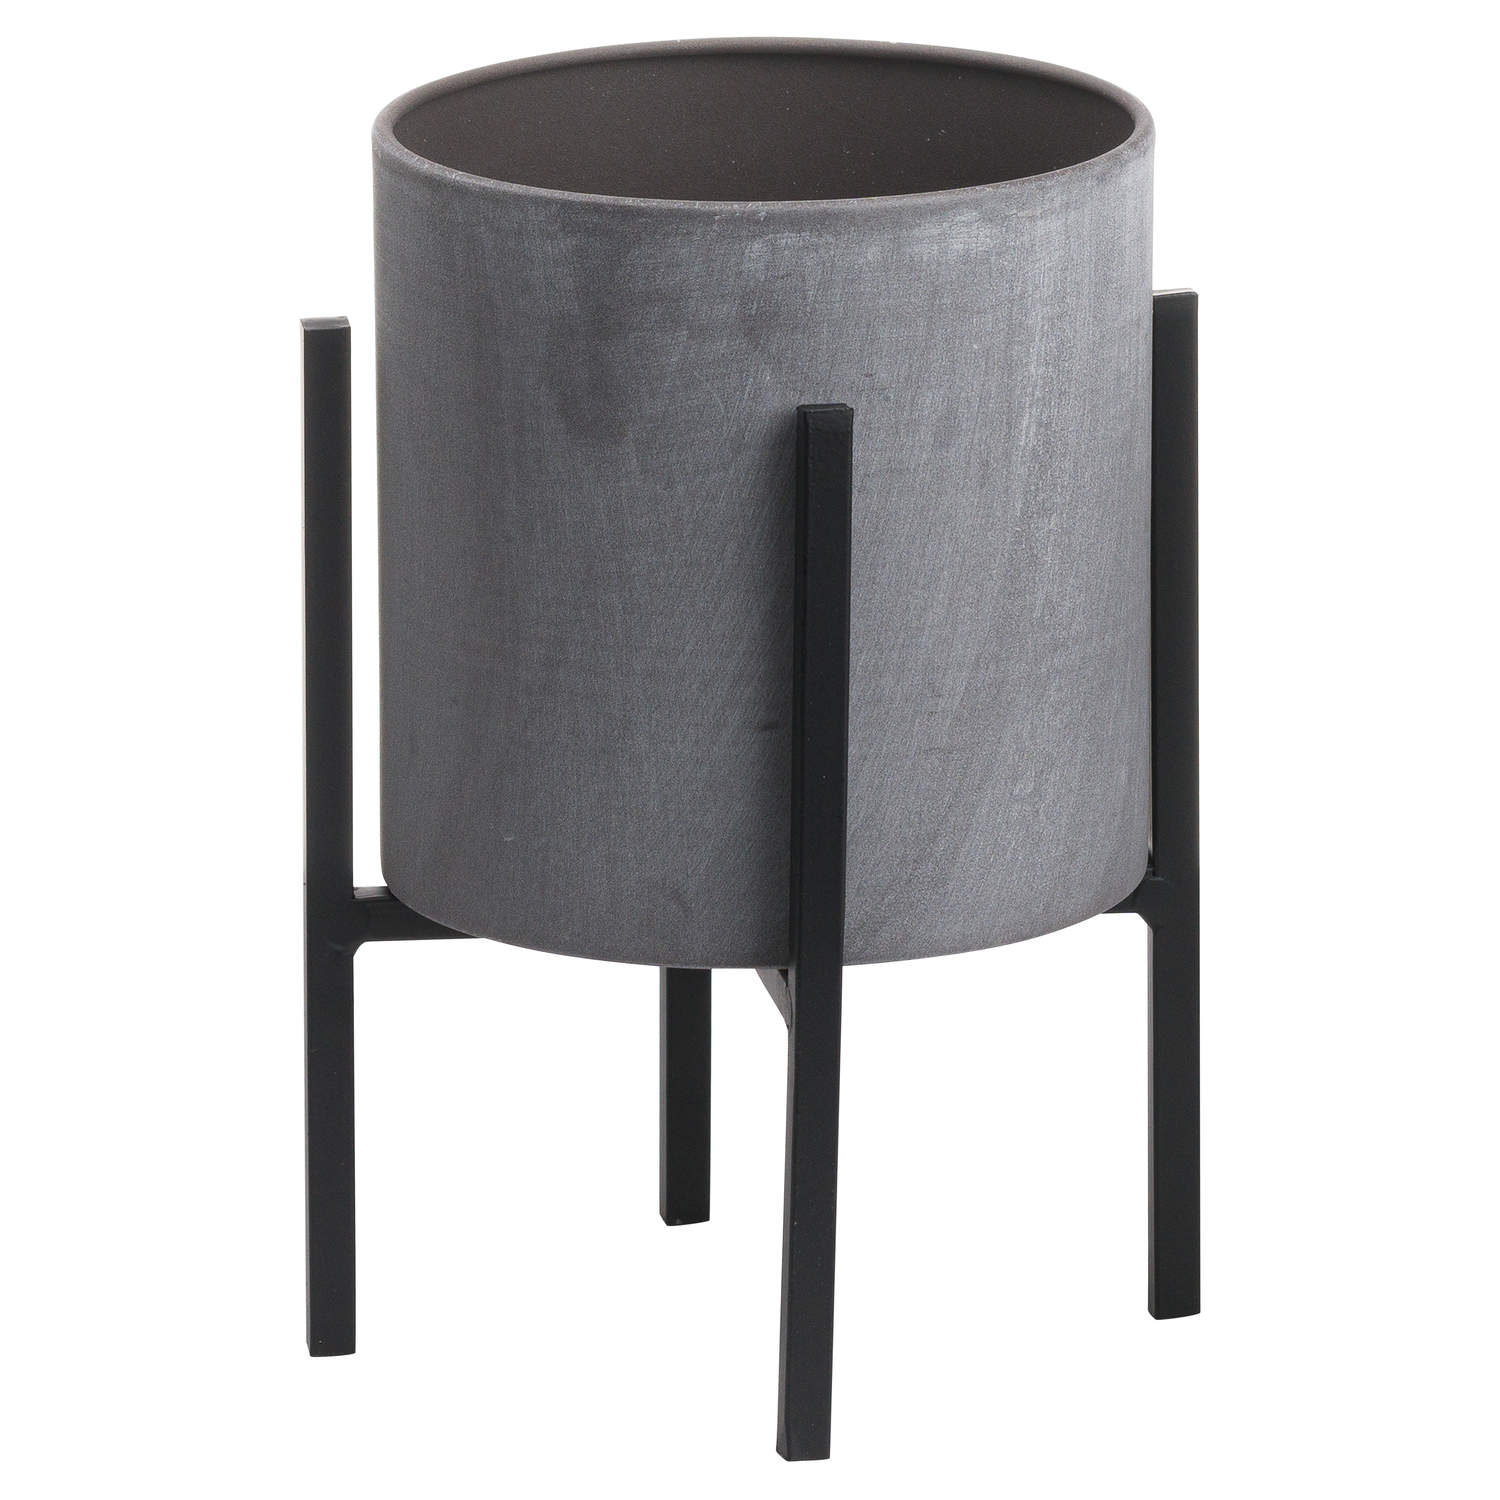 Set Of Two Cylindrical Table Top Planters - Image 2